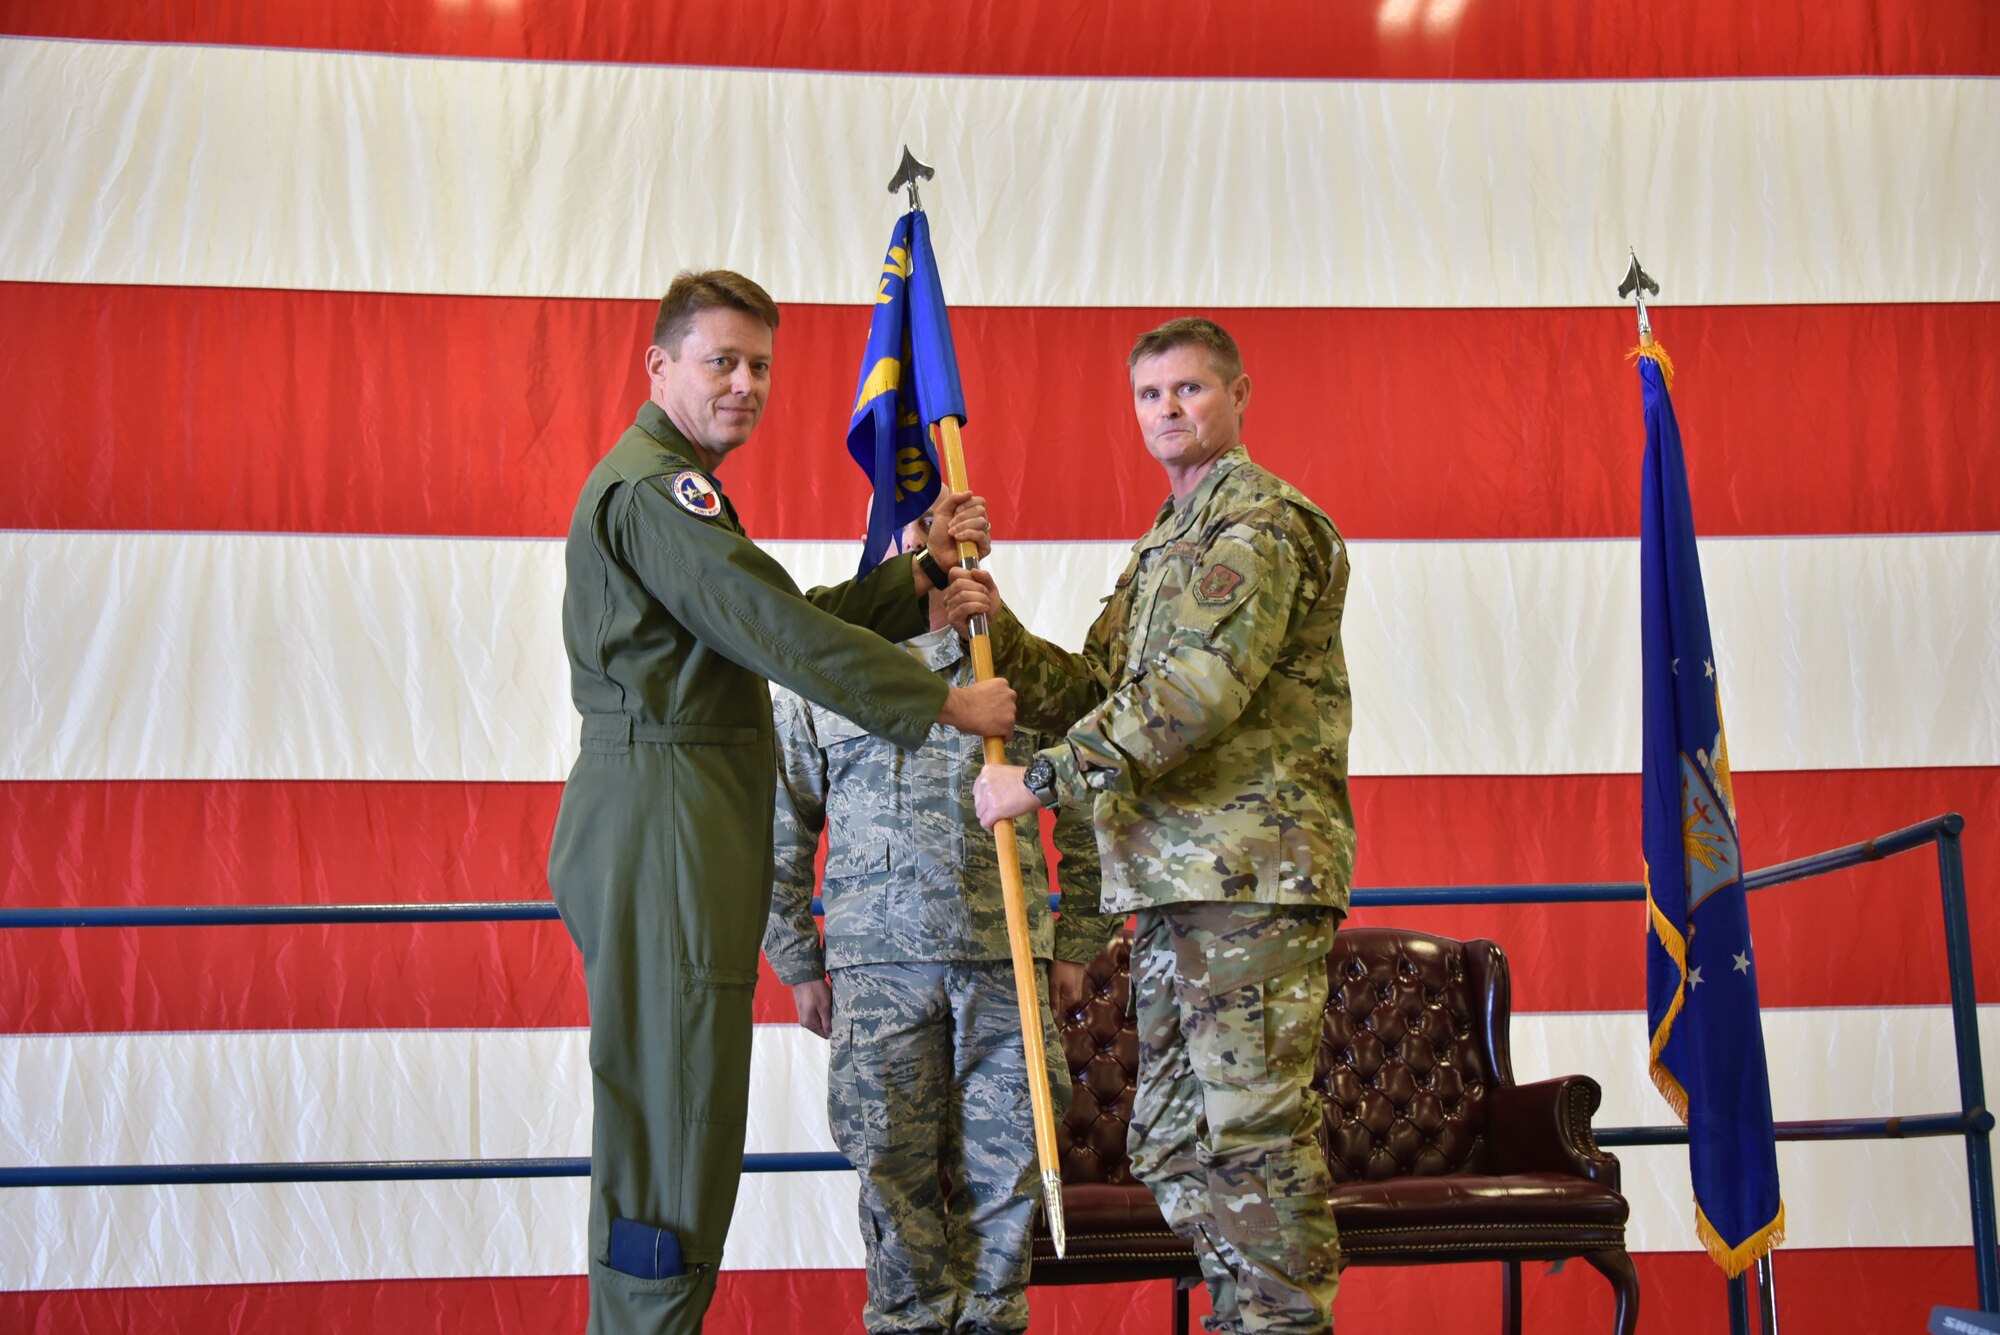 Col. L. Gregg Russell takes command of the 301st Mission Support Group as he receives the guidon from Col. Mitchell Hanson, 301 FW commander, Jan. 12, 2020, at Naval Air Station Joint Reserve Base Fort Worth, Texas. When the incoming commander takes the guidon during an assumption of command ceremony, it symbolizes the authority given to them to lead their group and the responsibility to take care of their Airmen and their mission. (U.S. Air Force photo by Senior Airman Brittany Landy)